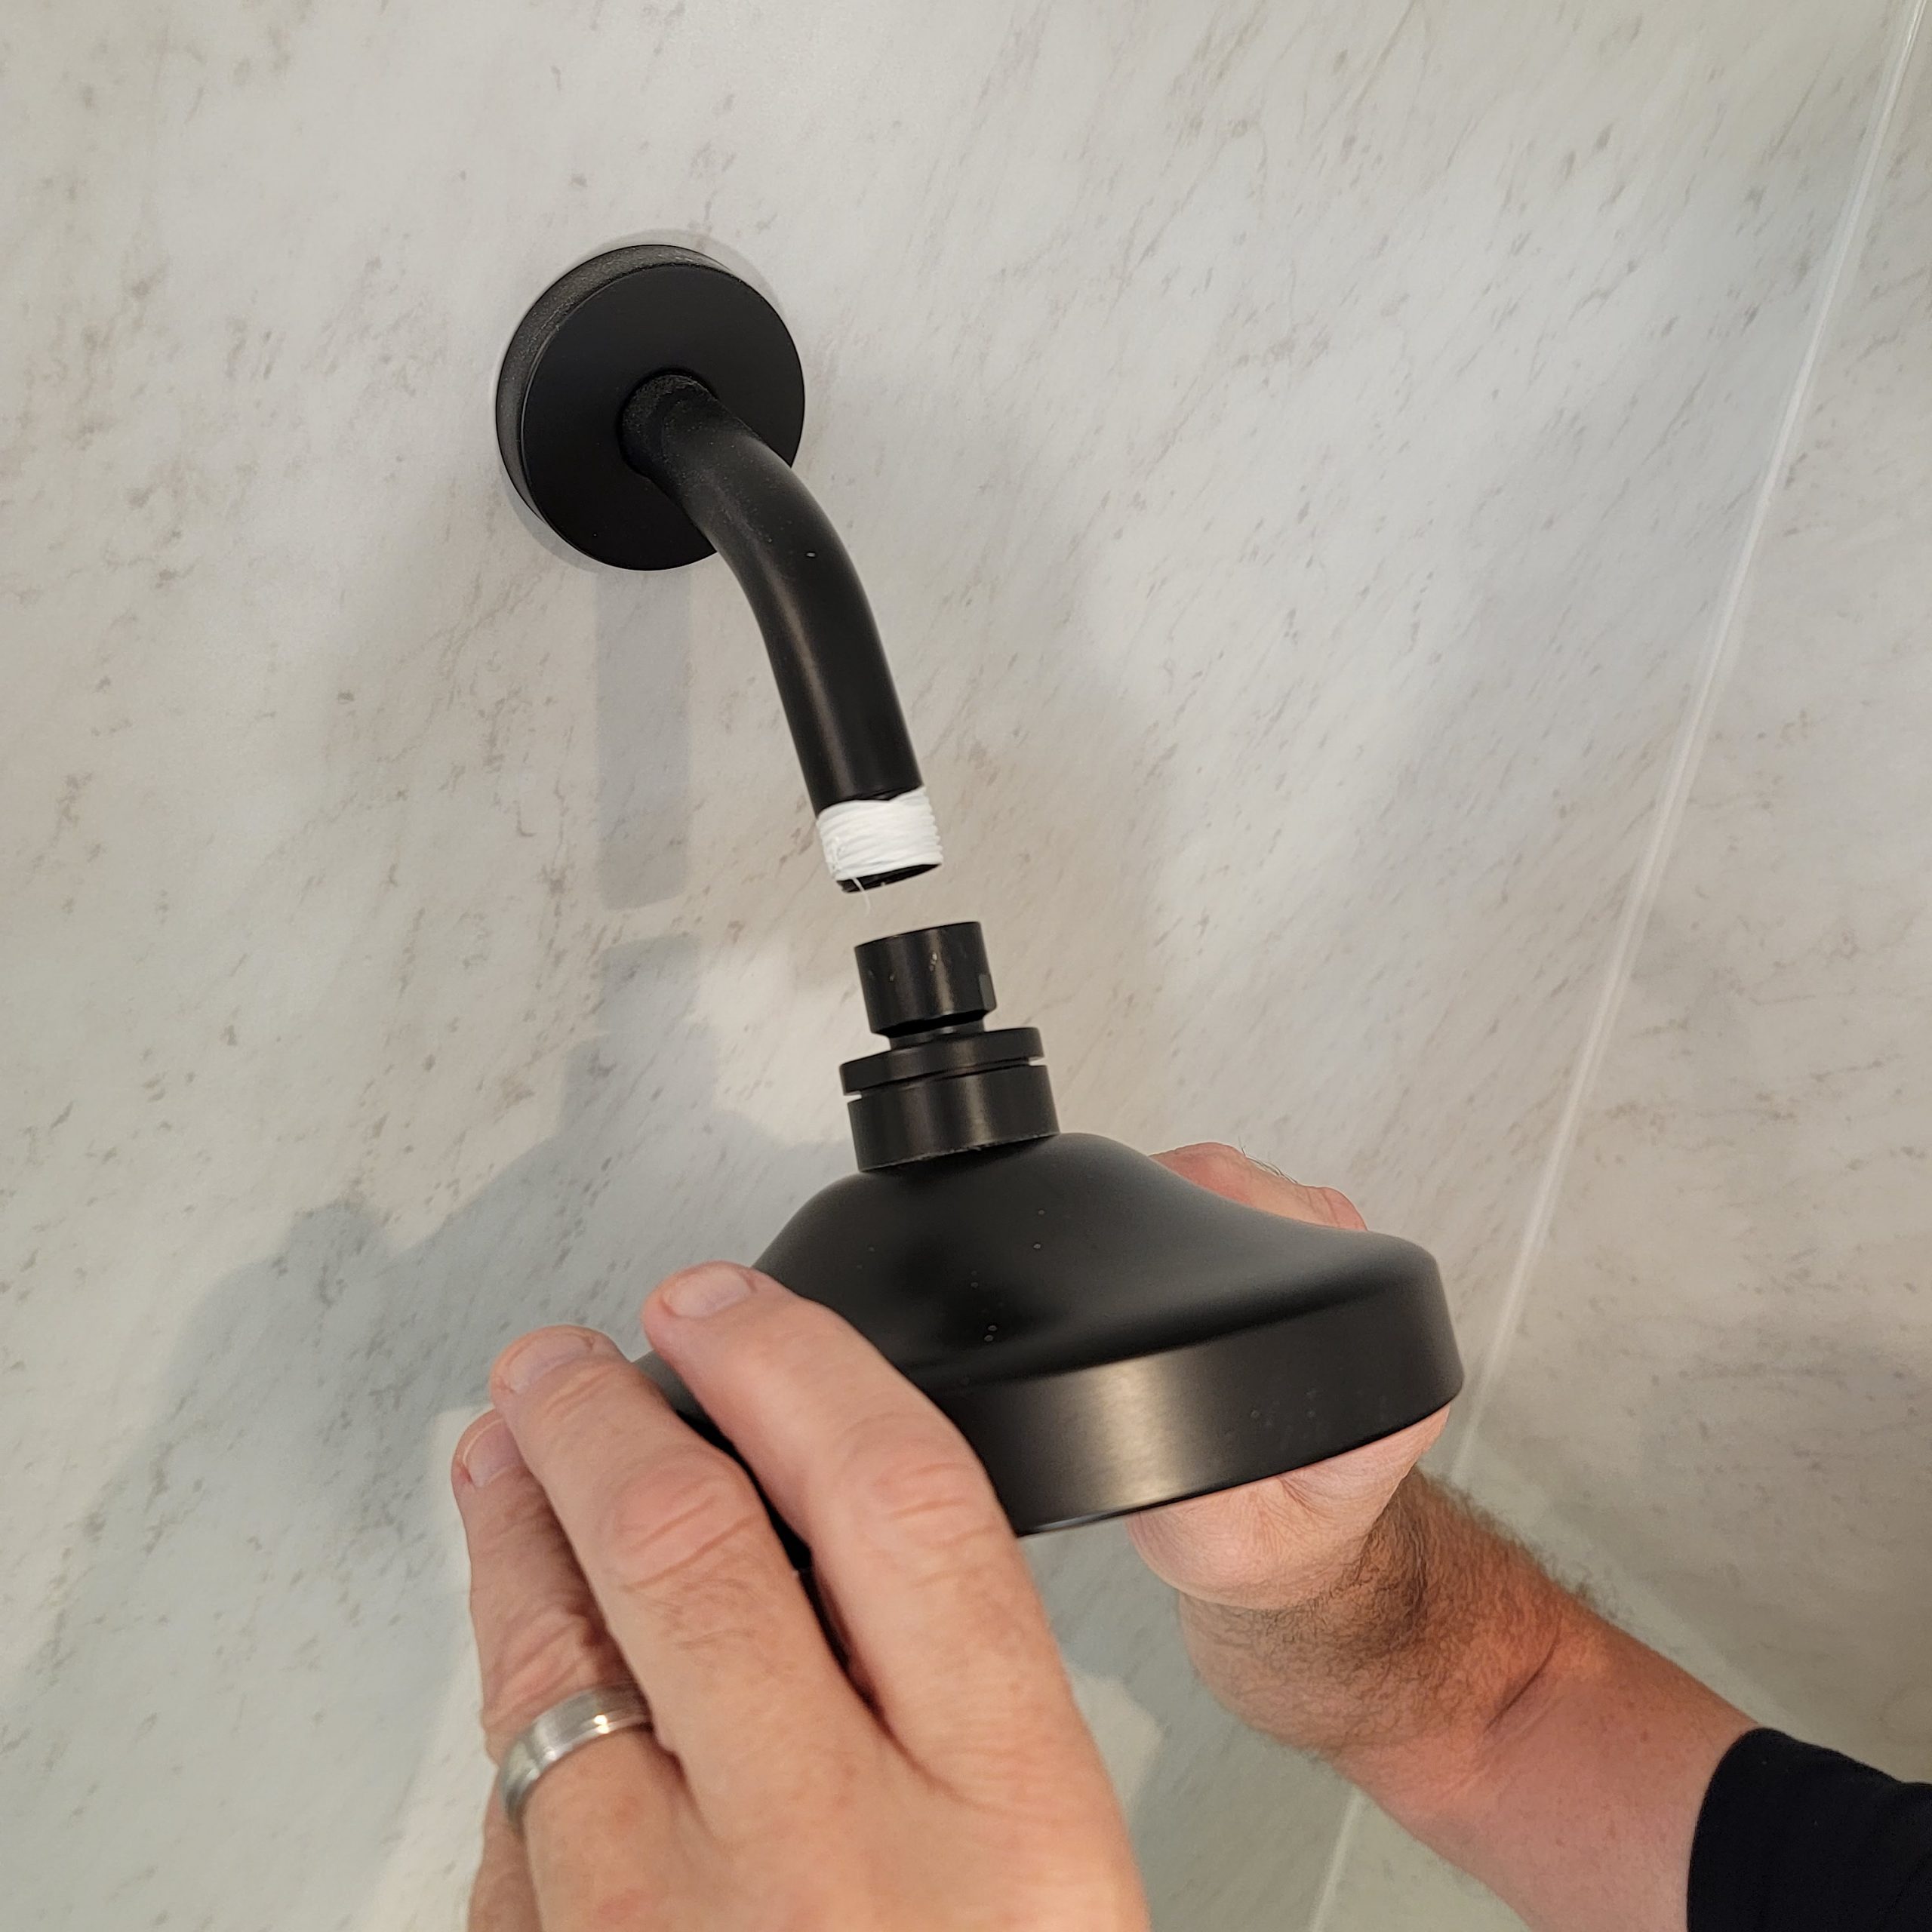 installing the new showerhead